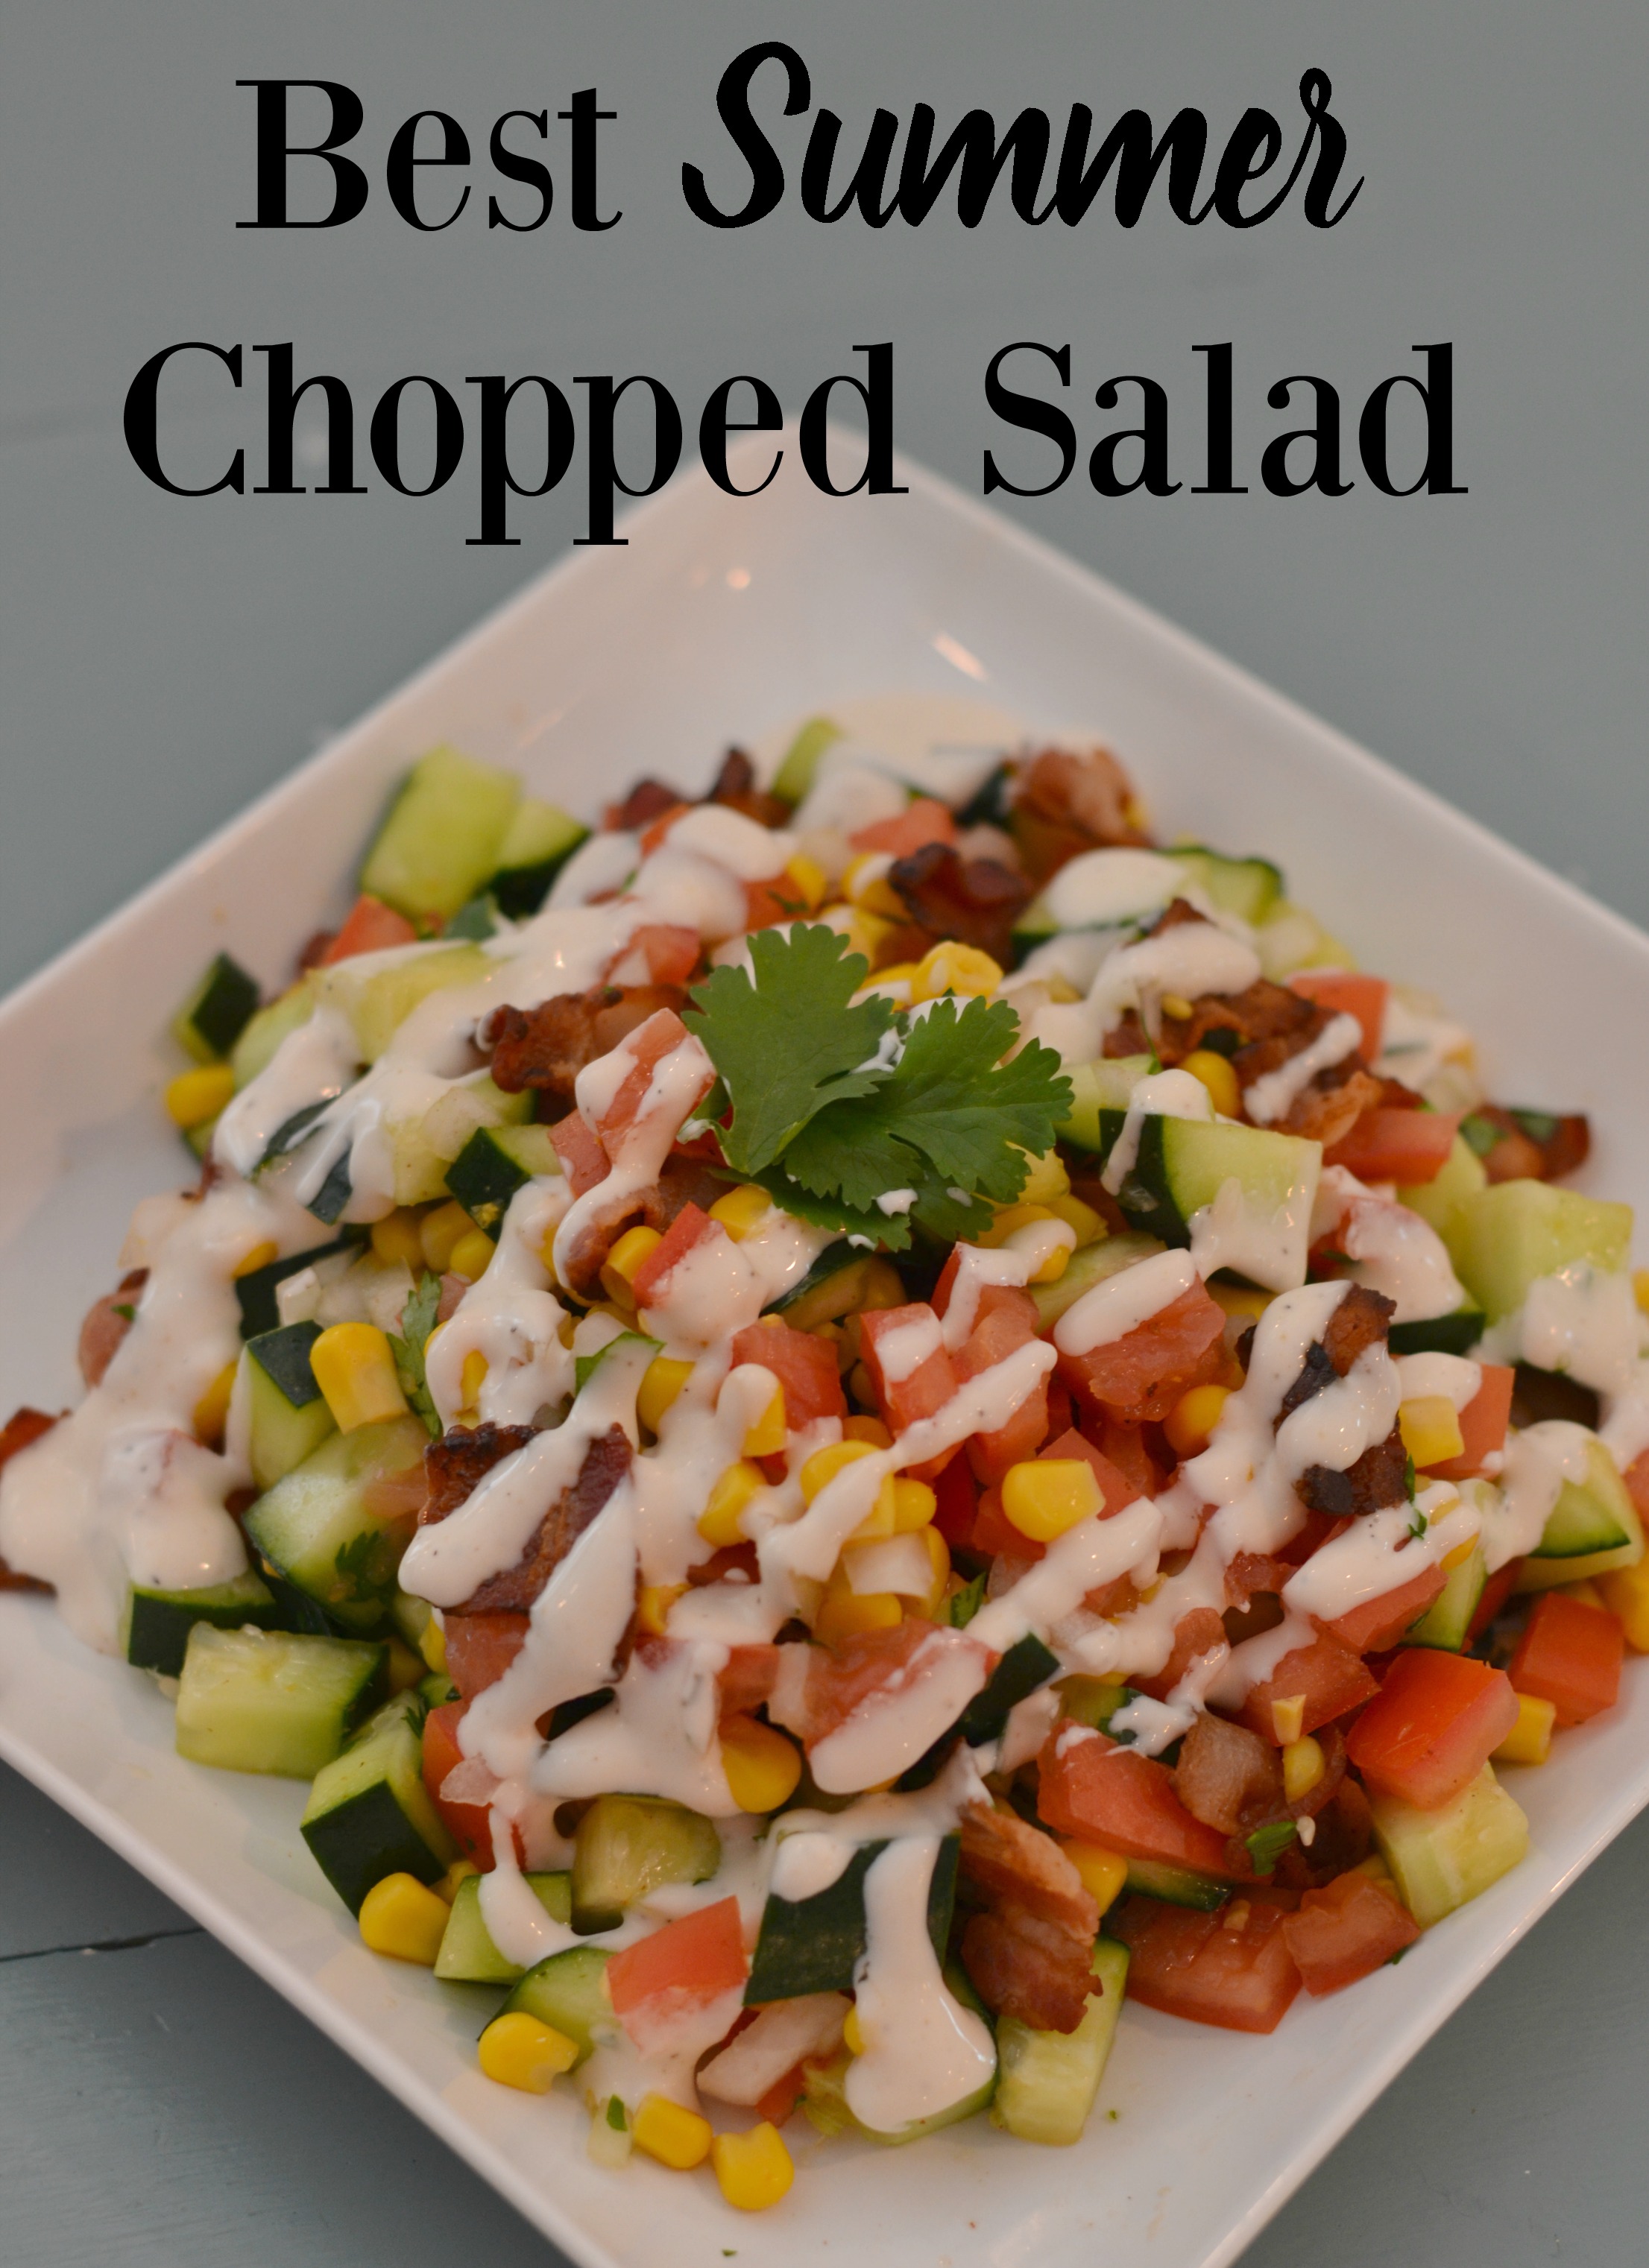 Best Summer Chopped Salad- this salad is so deliciou and easy. Cucumber, tomato, avocado, bacon and more!